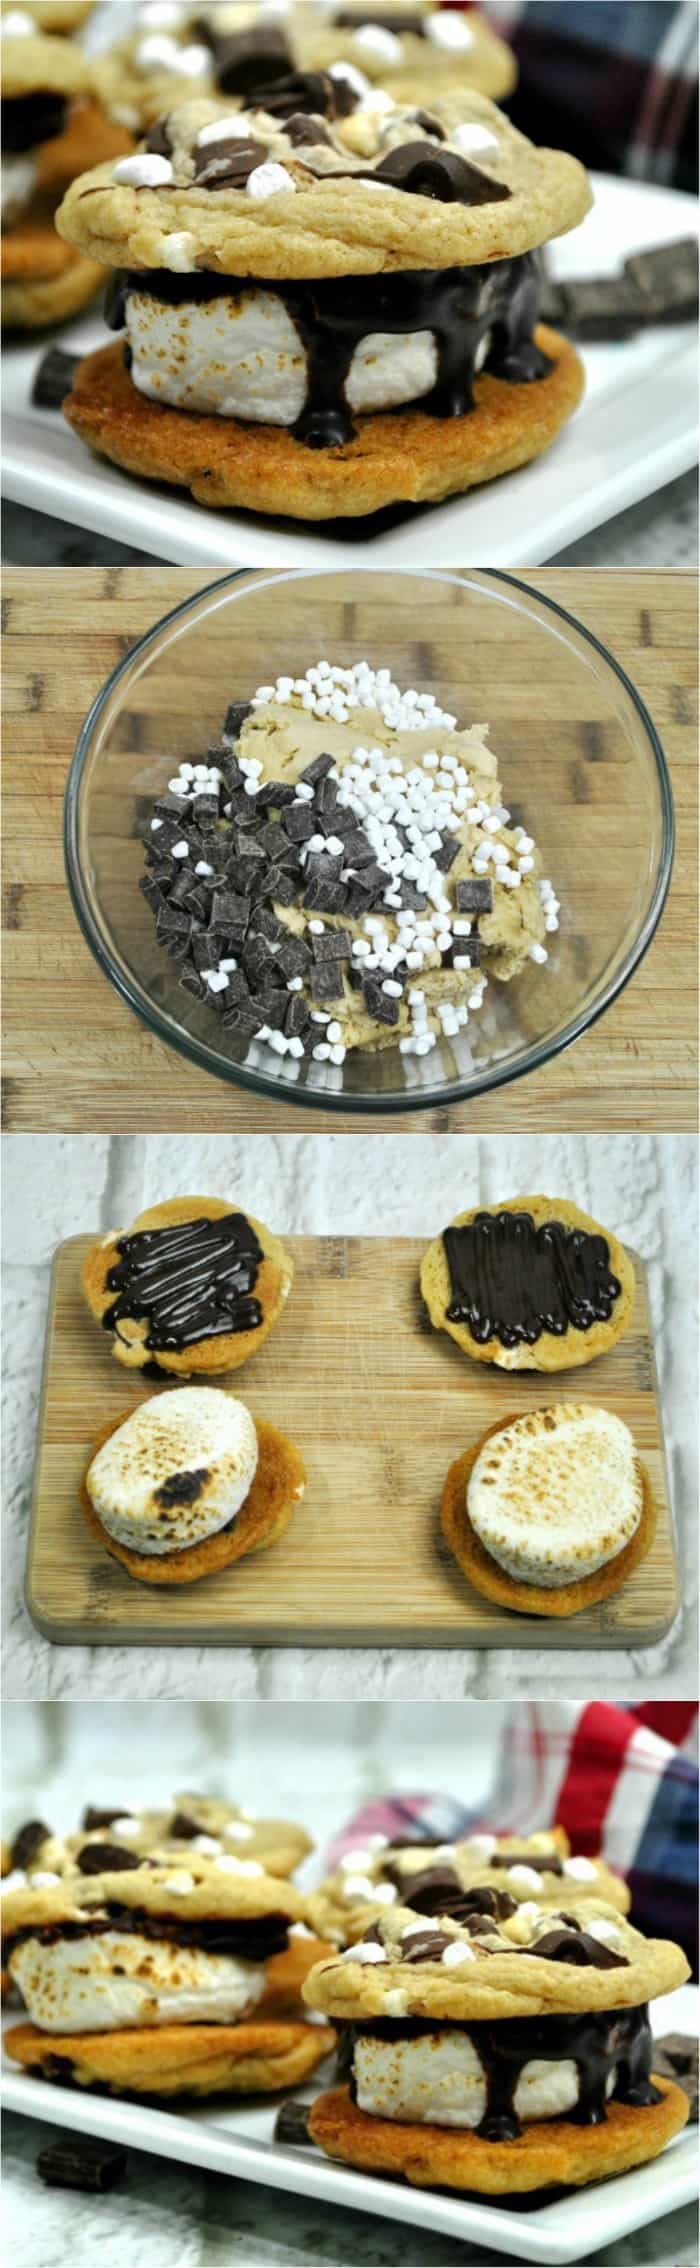 How to Make Chocolate Chip Cookie S'mores